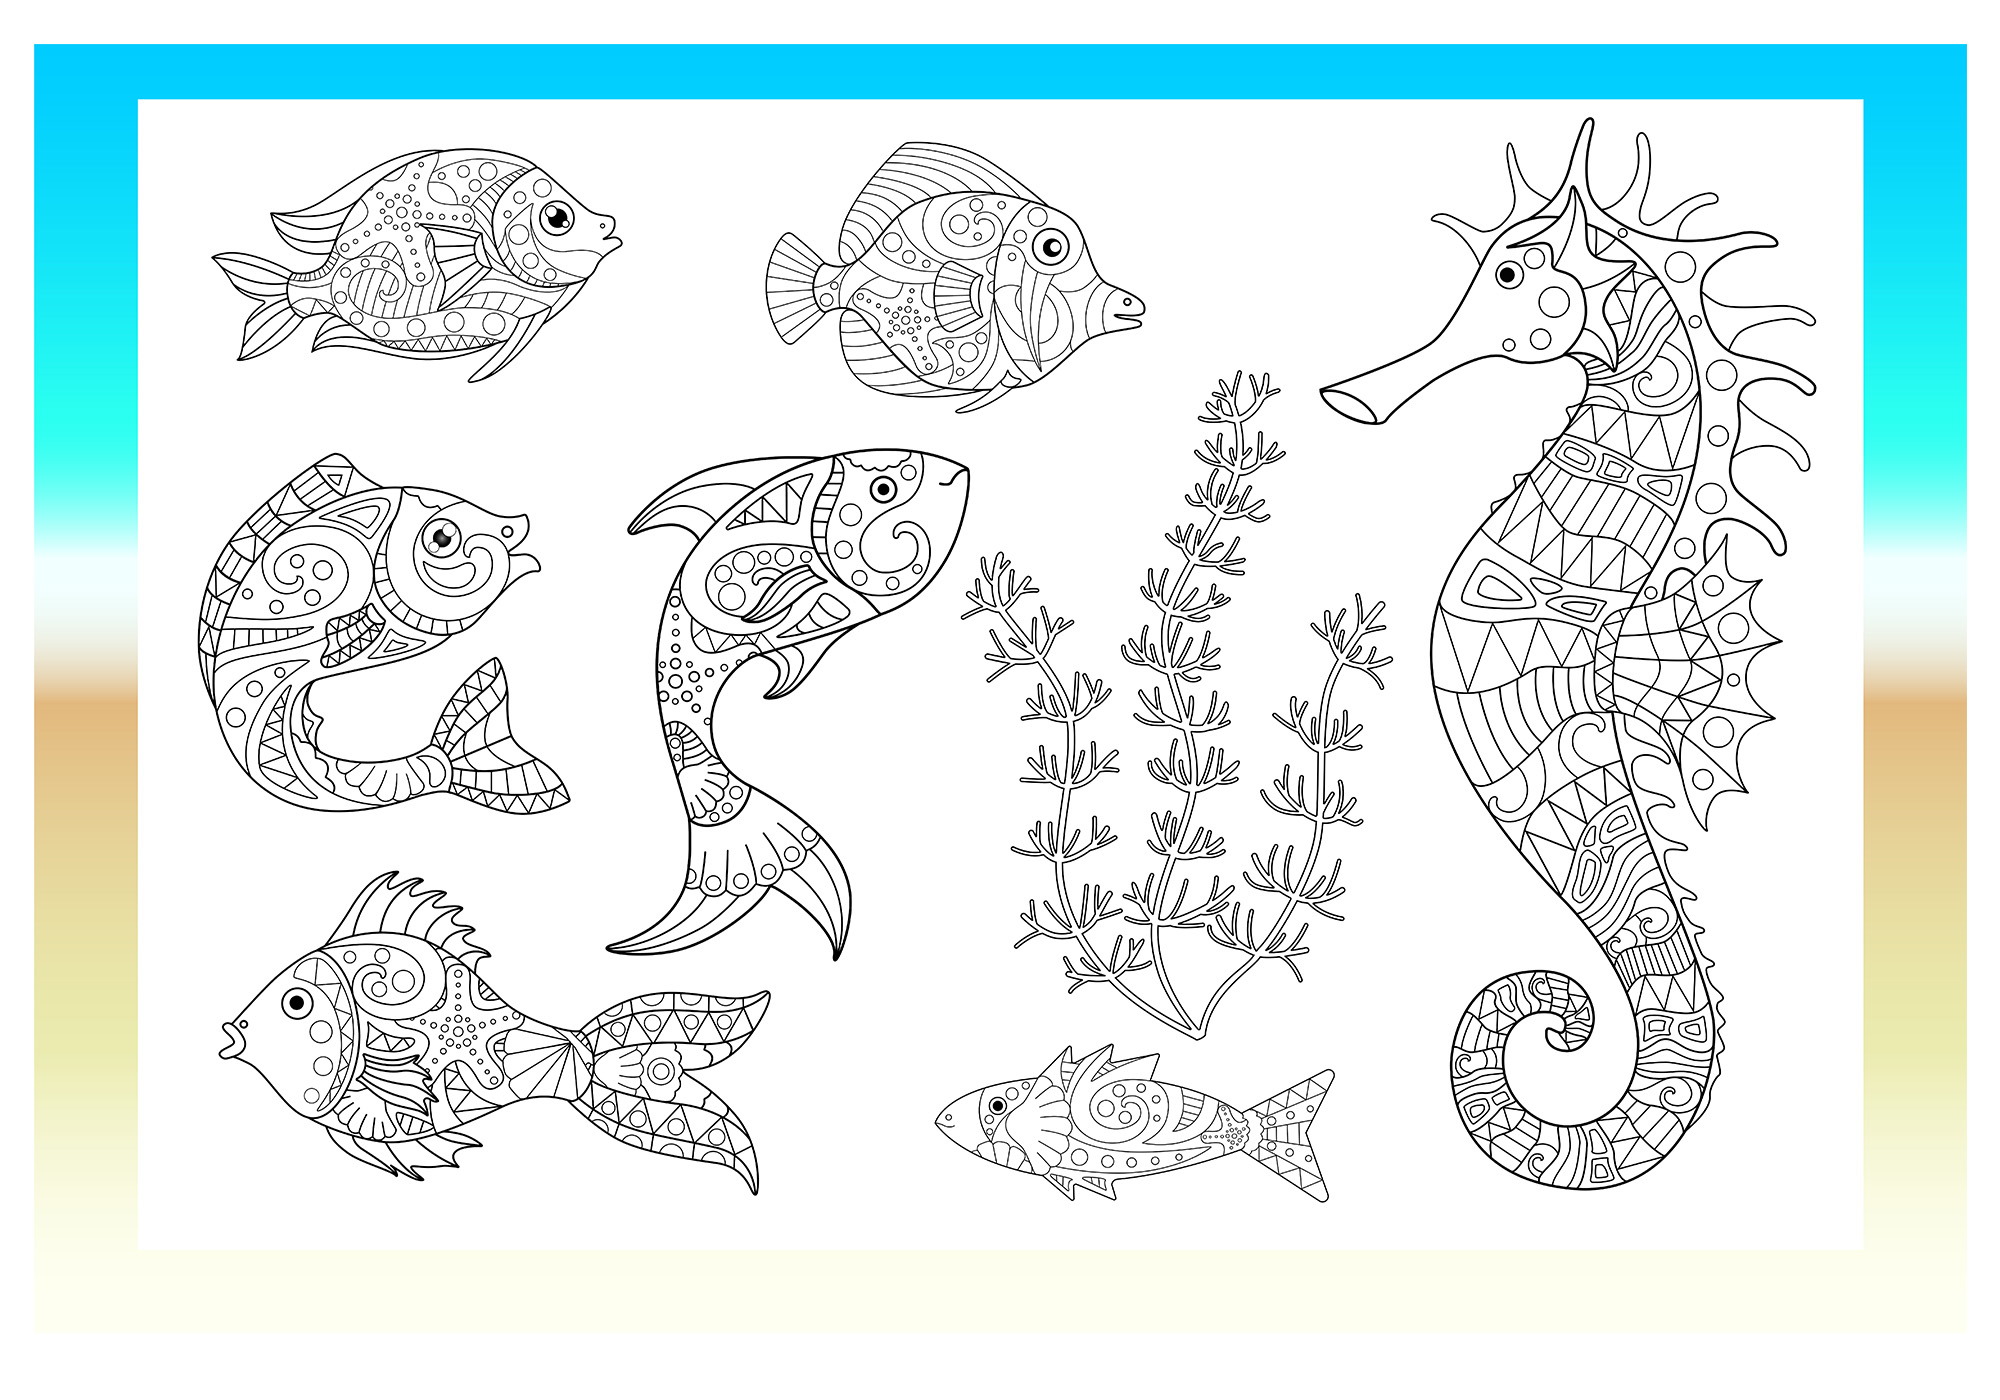 Coloring page with sea animals and plants.